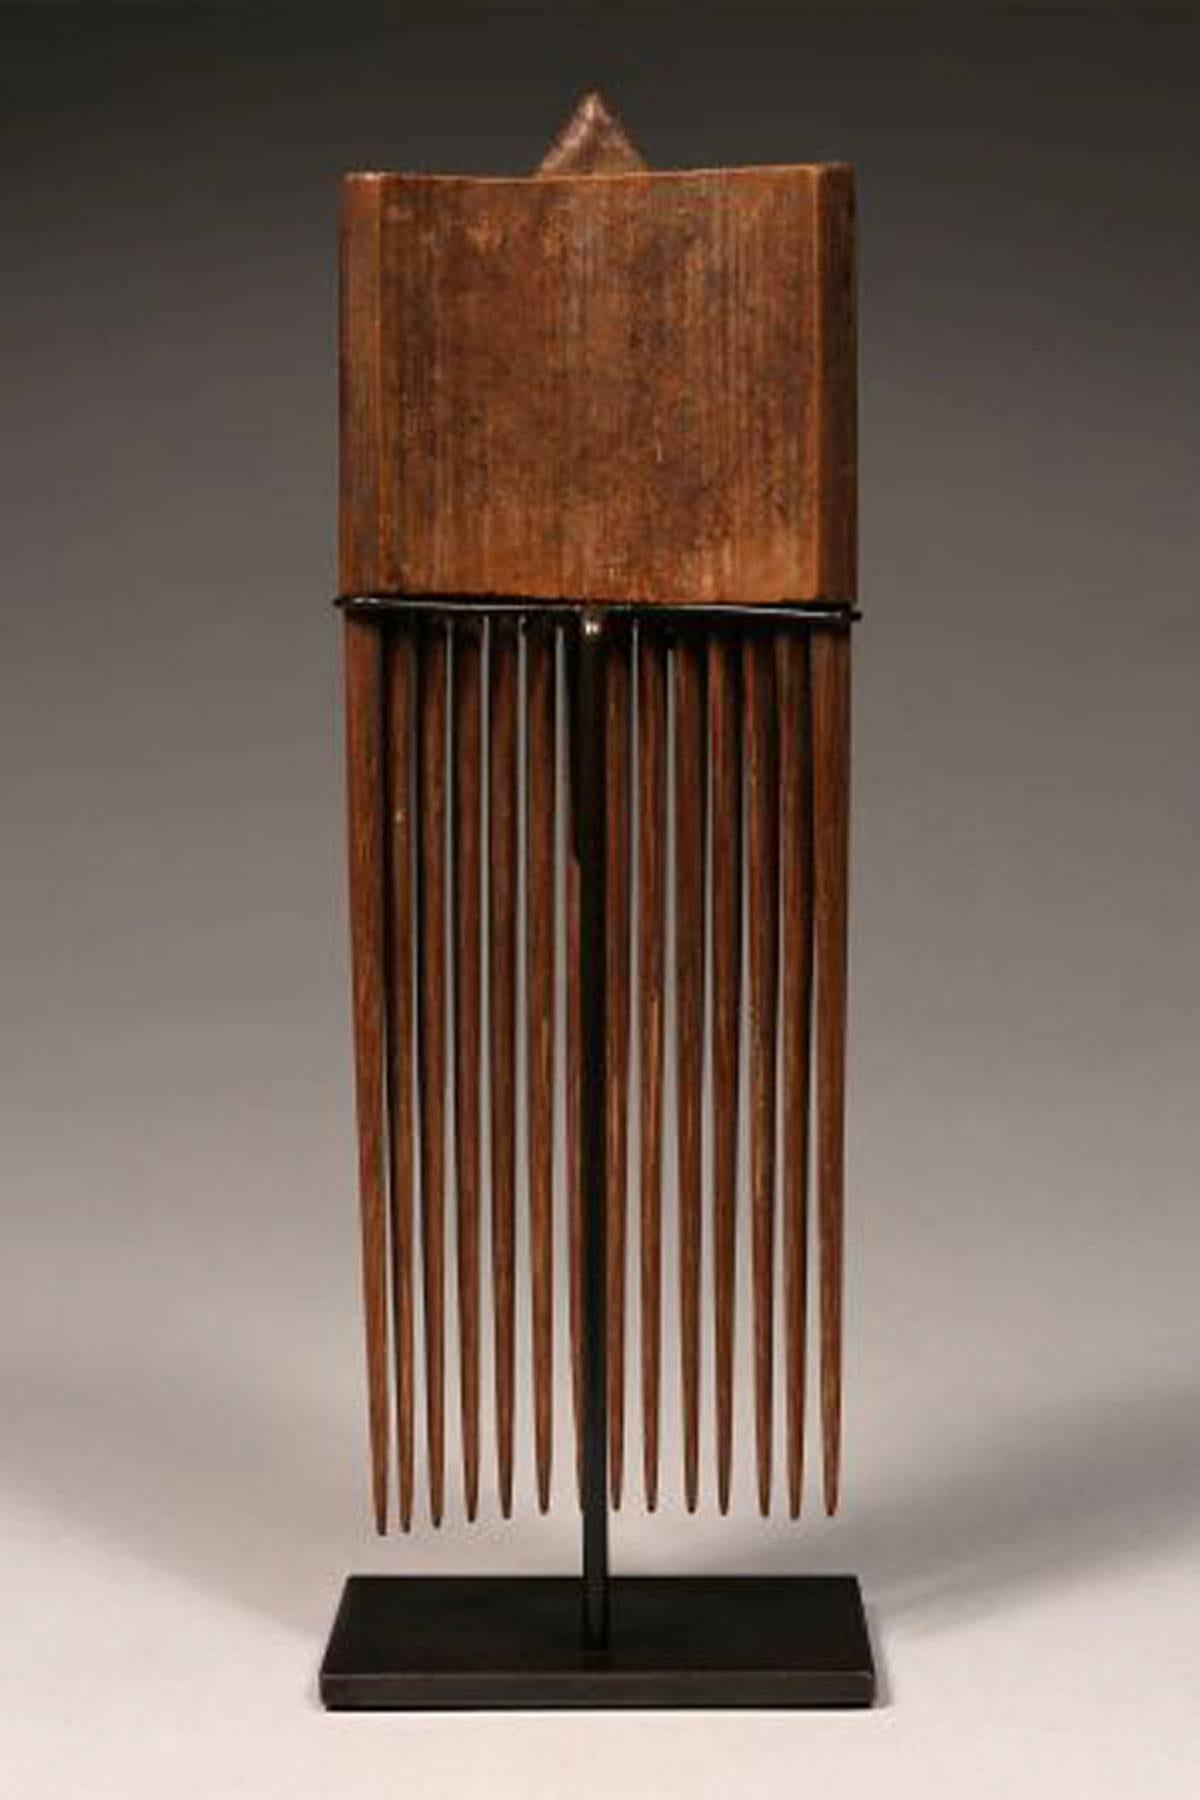 Hand-Carved Early to Mid-20th Century Mounted Tribal Bamboo Comb, Papua New Guinea